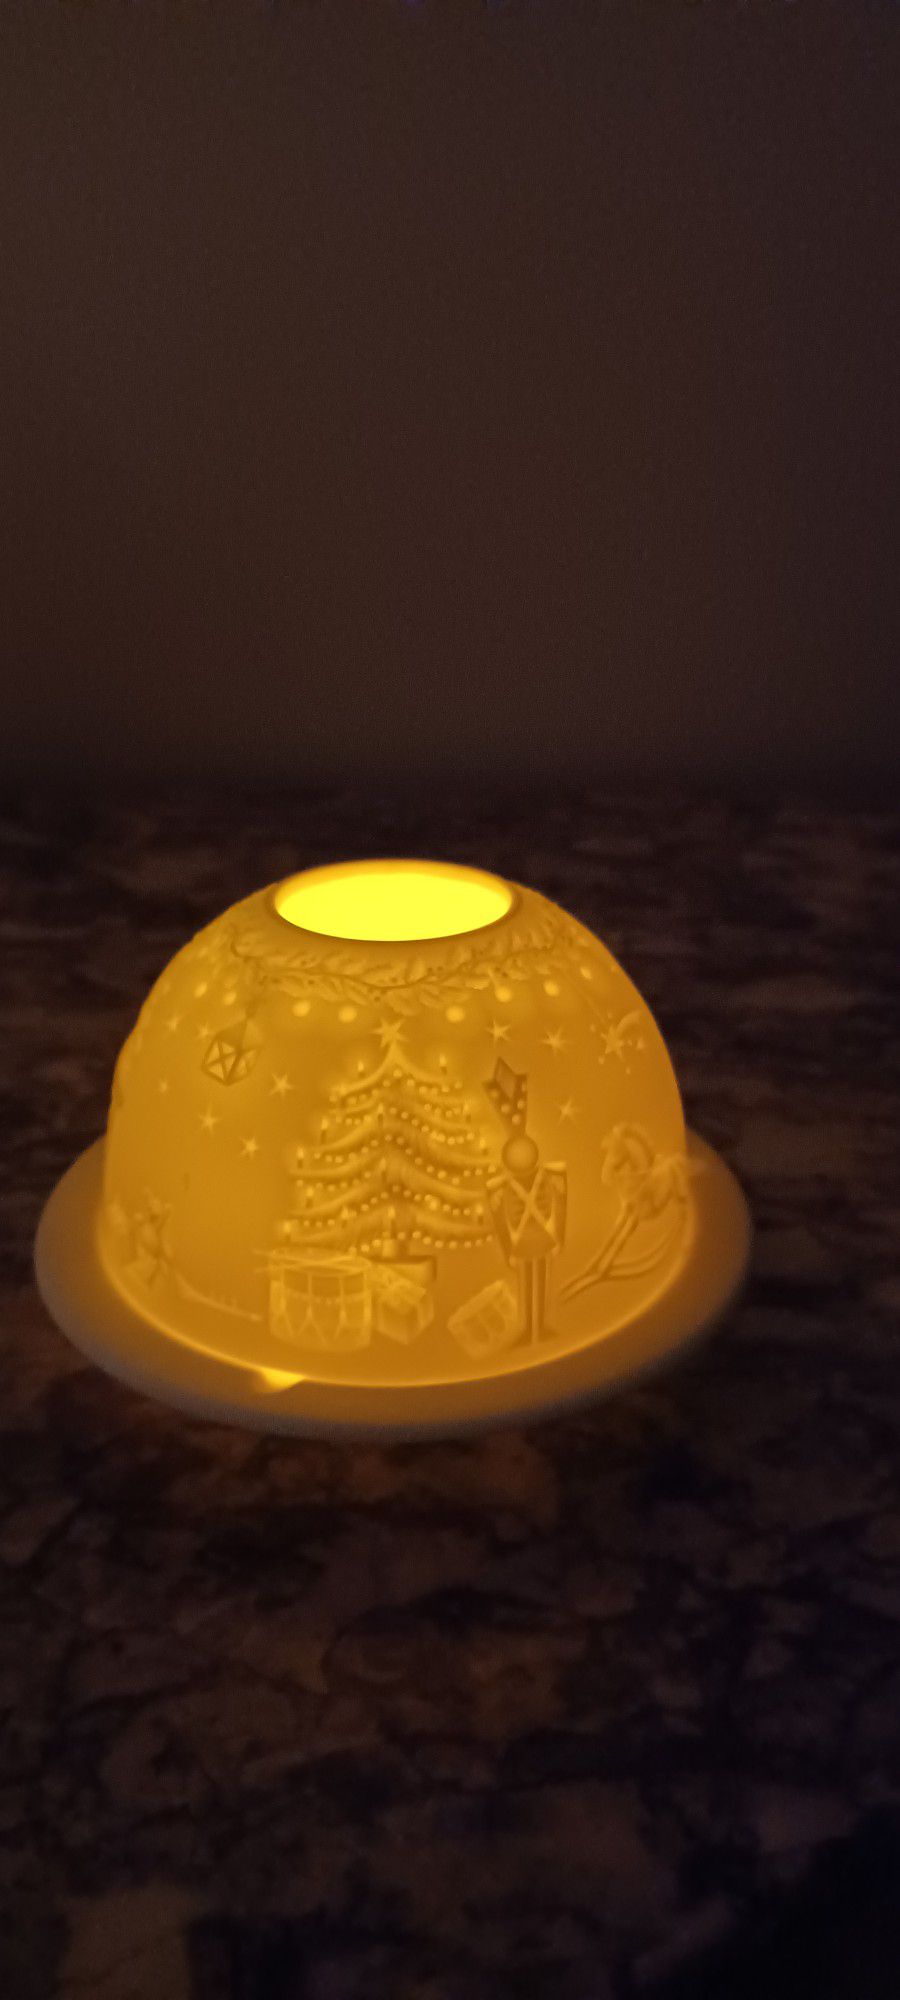 Candle Holder Christmas Scenes From Marshall Field's Bernardaud Limoges France